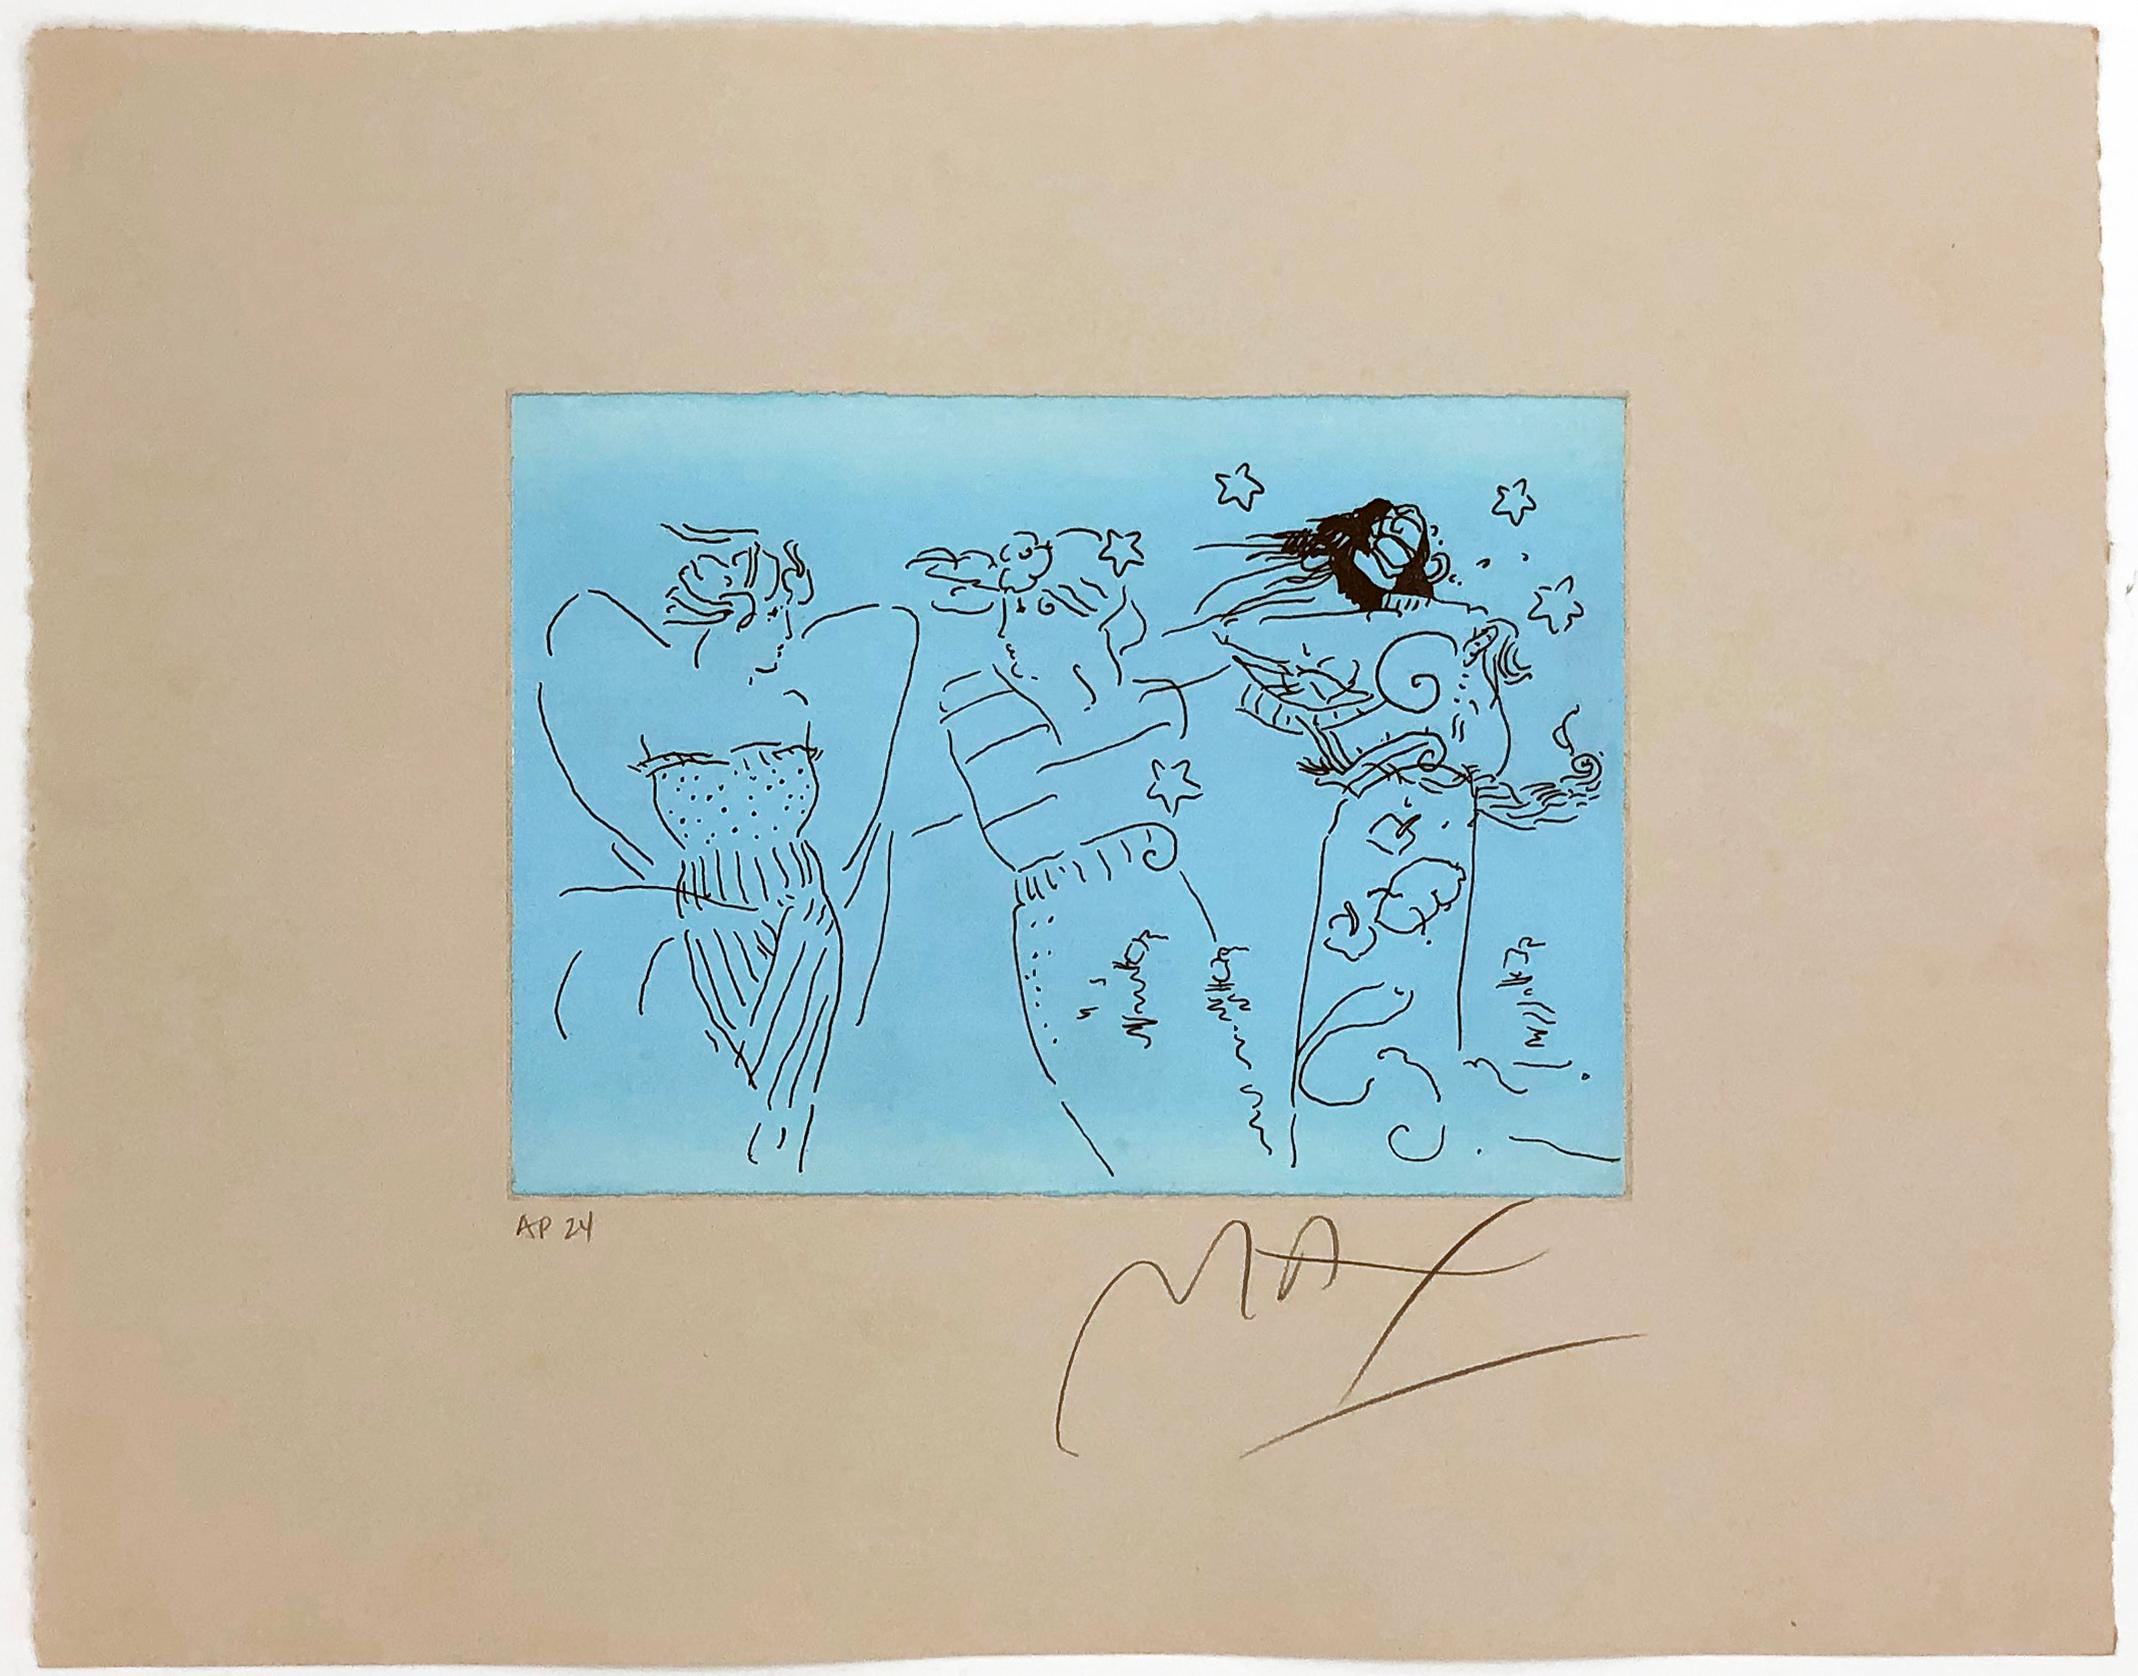 Complete suite of 6 hand signed and numbered etchings.  Includes hand signed binder.  Numbered AP 24 (aside from the main edition of 100).  Sheet size is 15 x 19 inches each.  Image size is 7.5 x 10 inches each.

Etchings are in excellent condition.